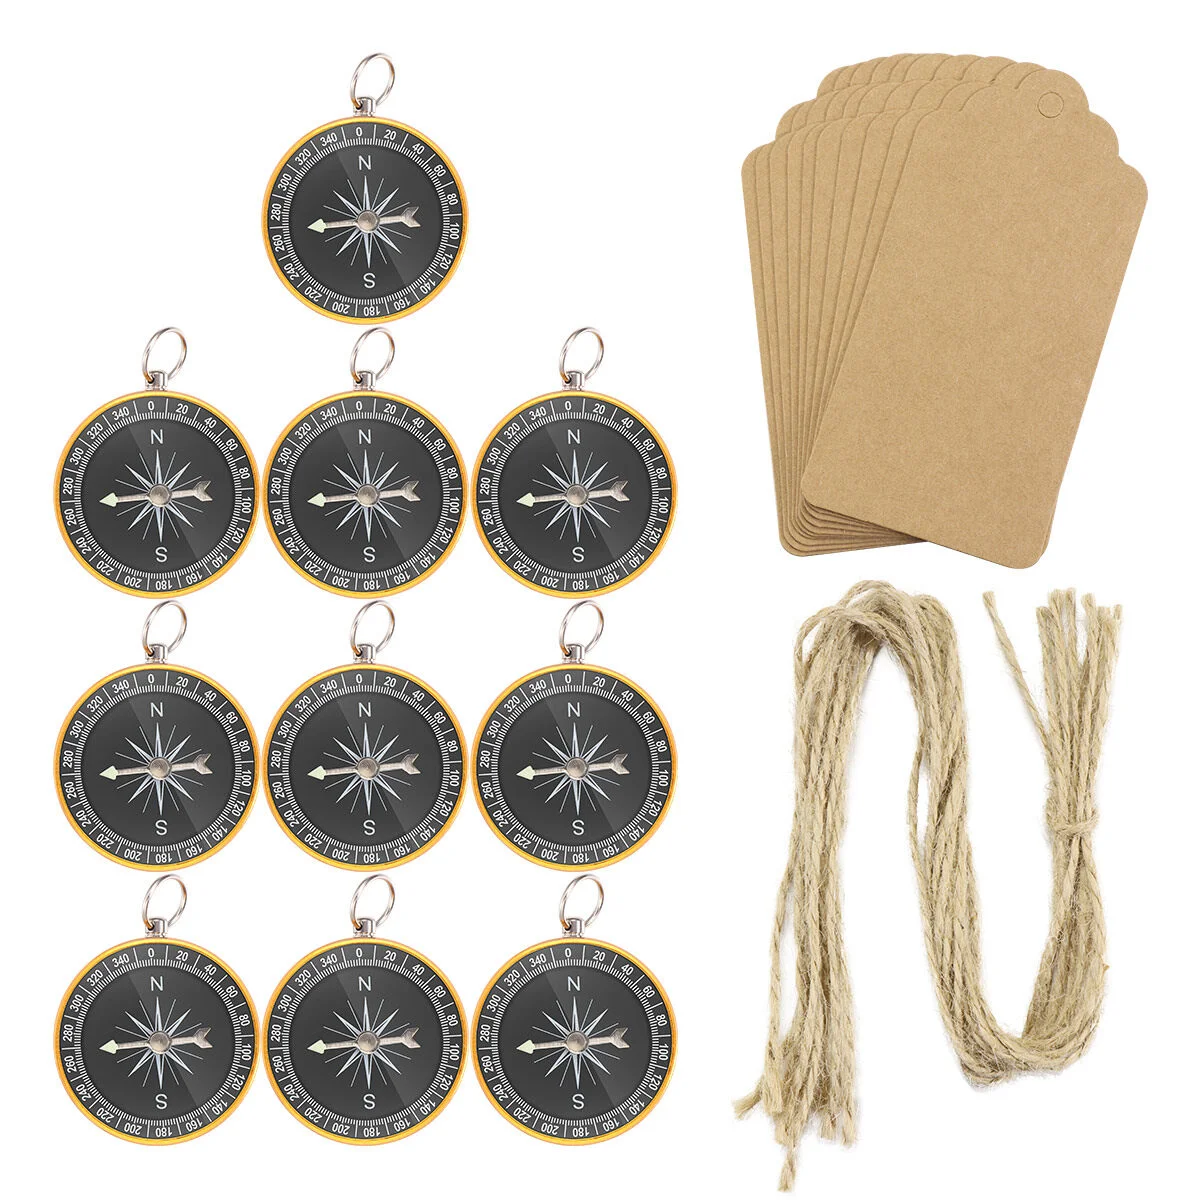 

10PCS Compass Party Favors for Guests, Compass Party Pendant Portable Pocket Compass with Kraft Tags Wedding Party Decoration